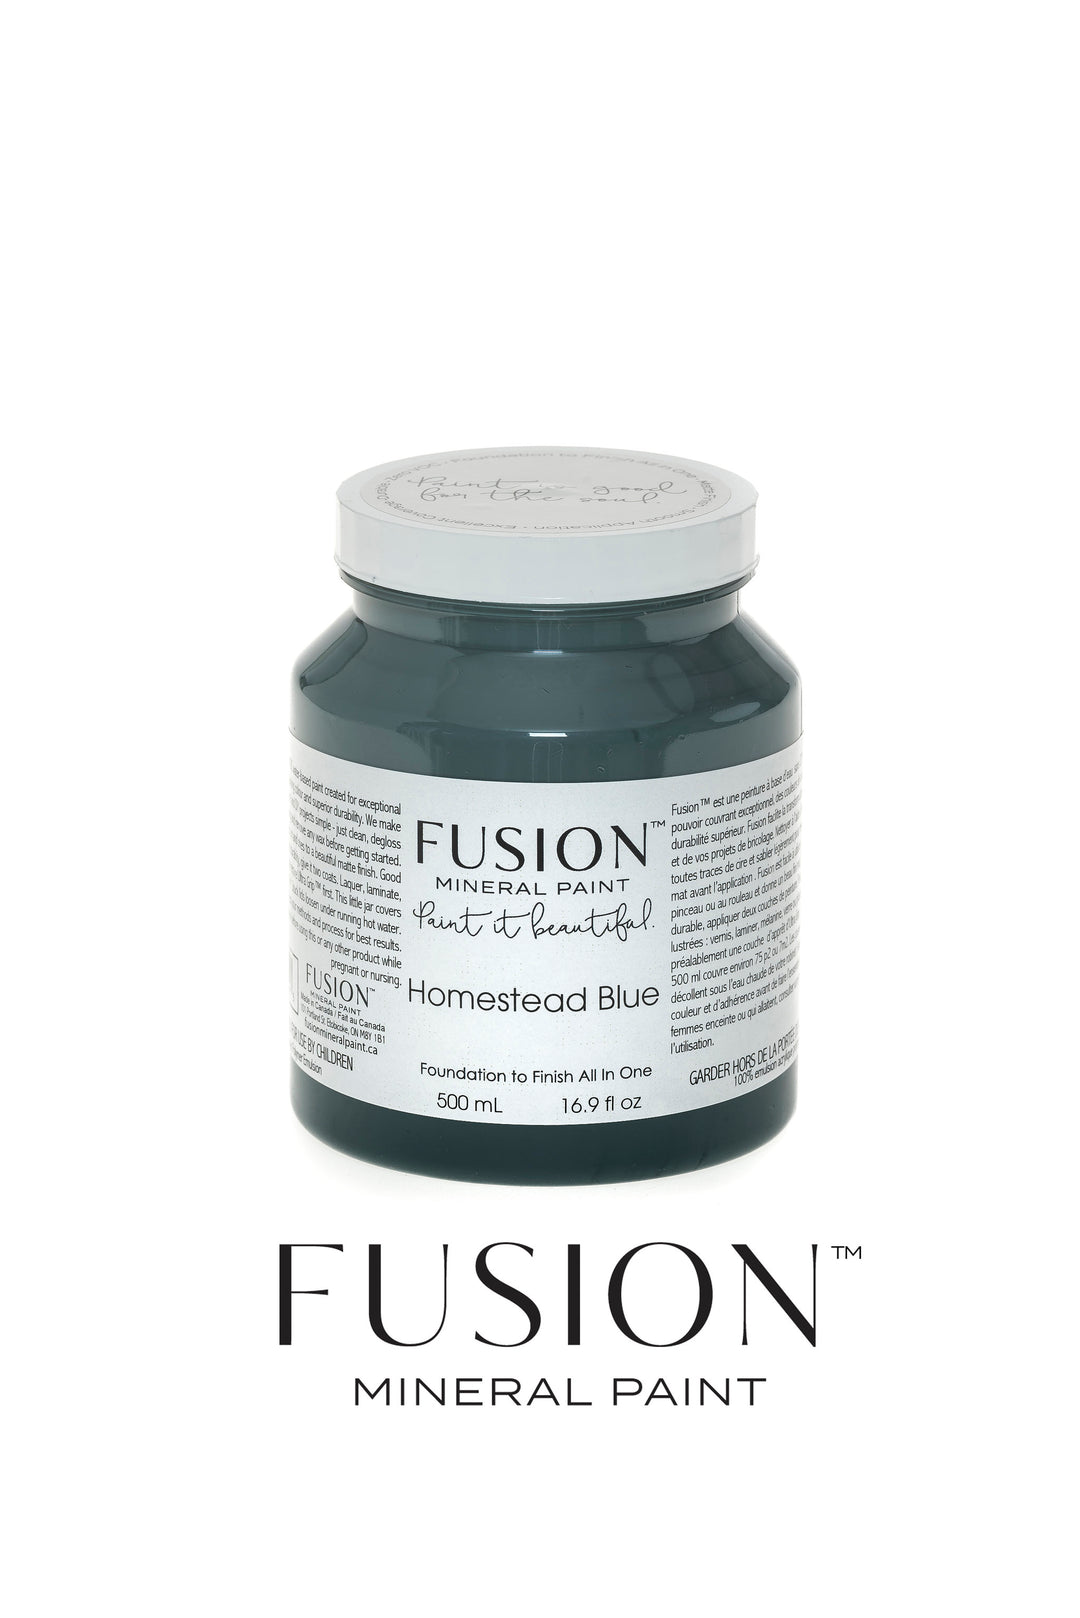 Fusion Mineral Paint-HOMESTEAD BLUE (Pint) - Acosta's Home